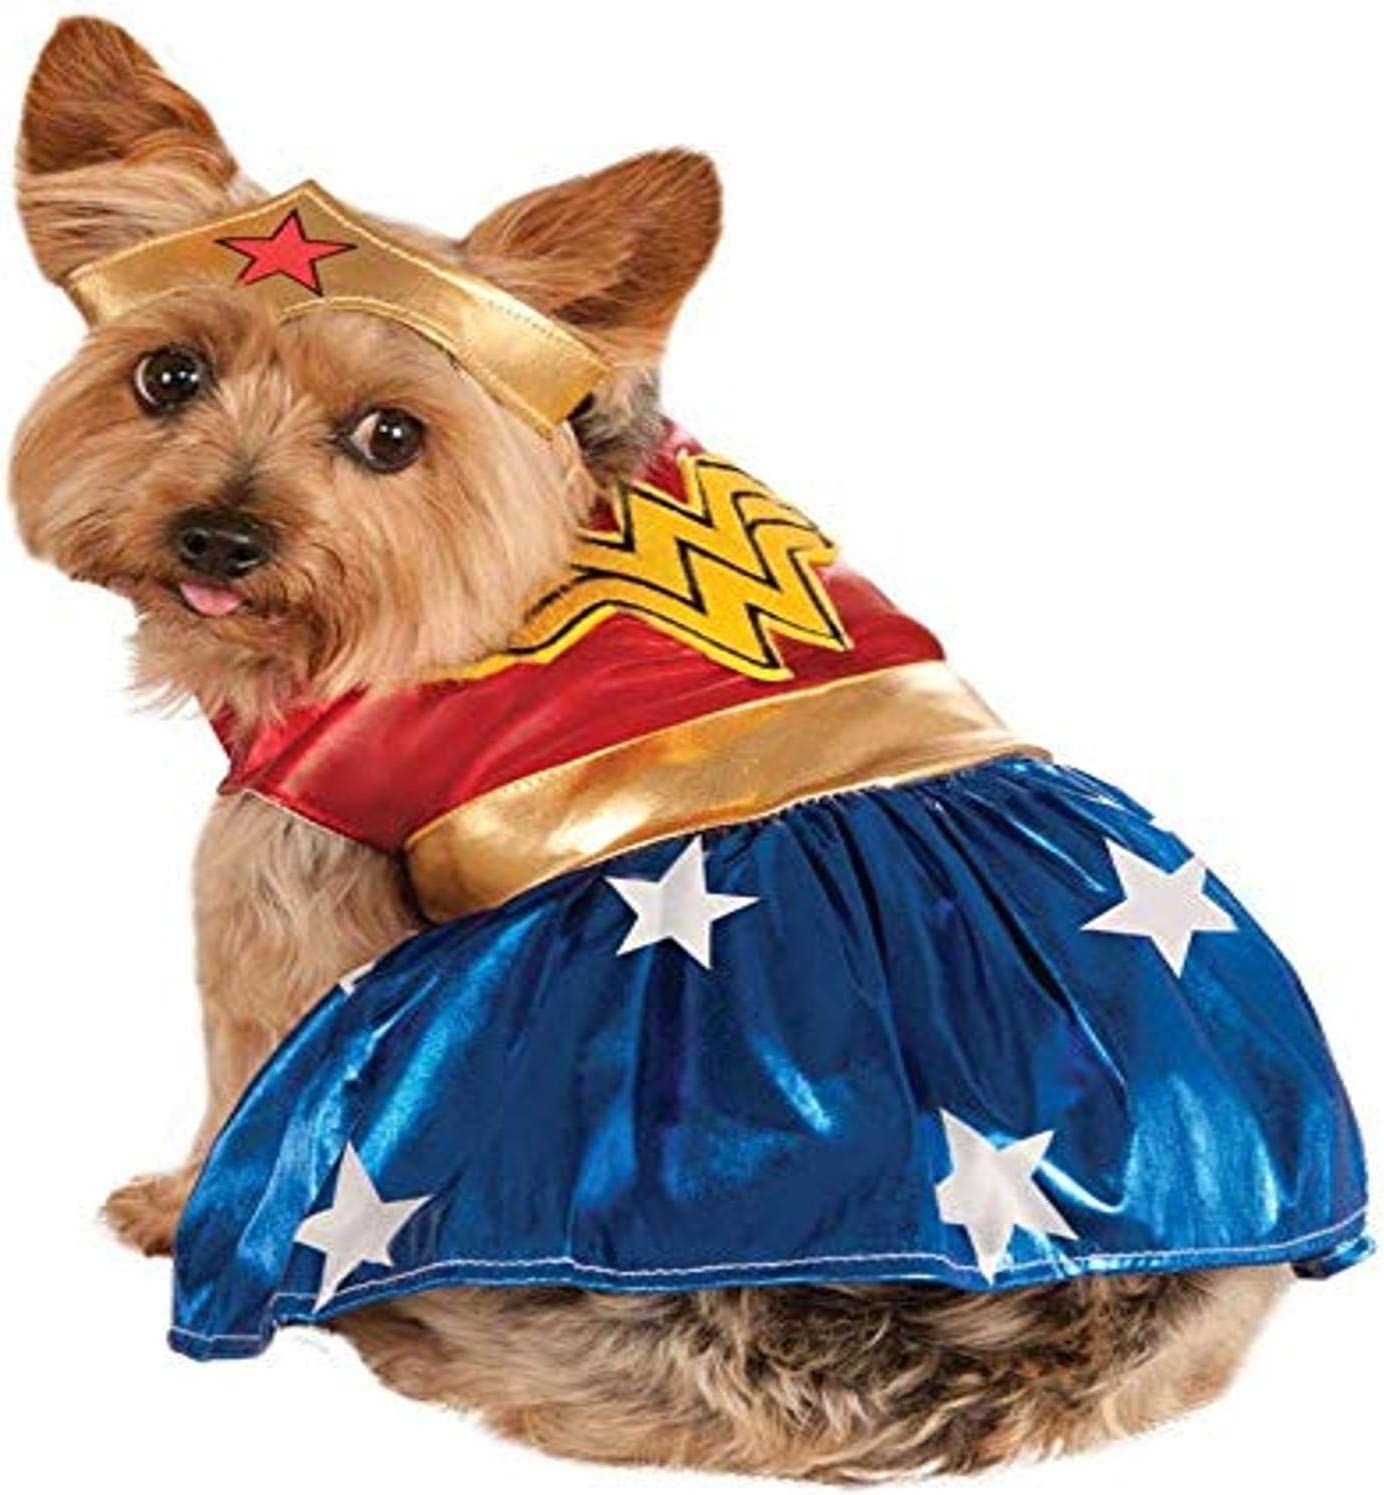 The 10 Best Halloween Costumes for Dogs (Updated 2022)